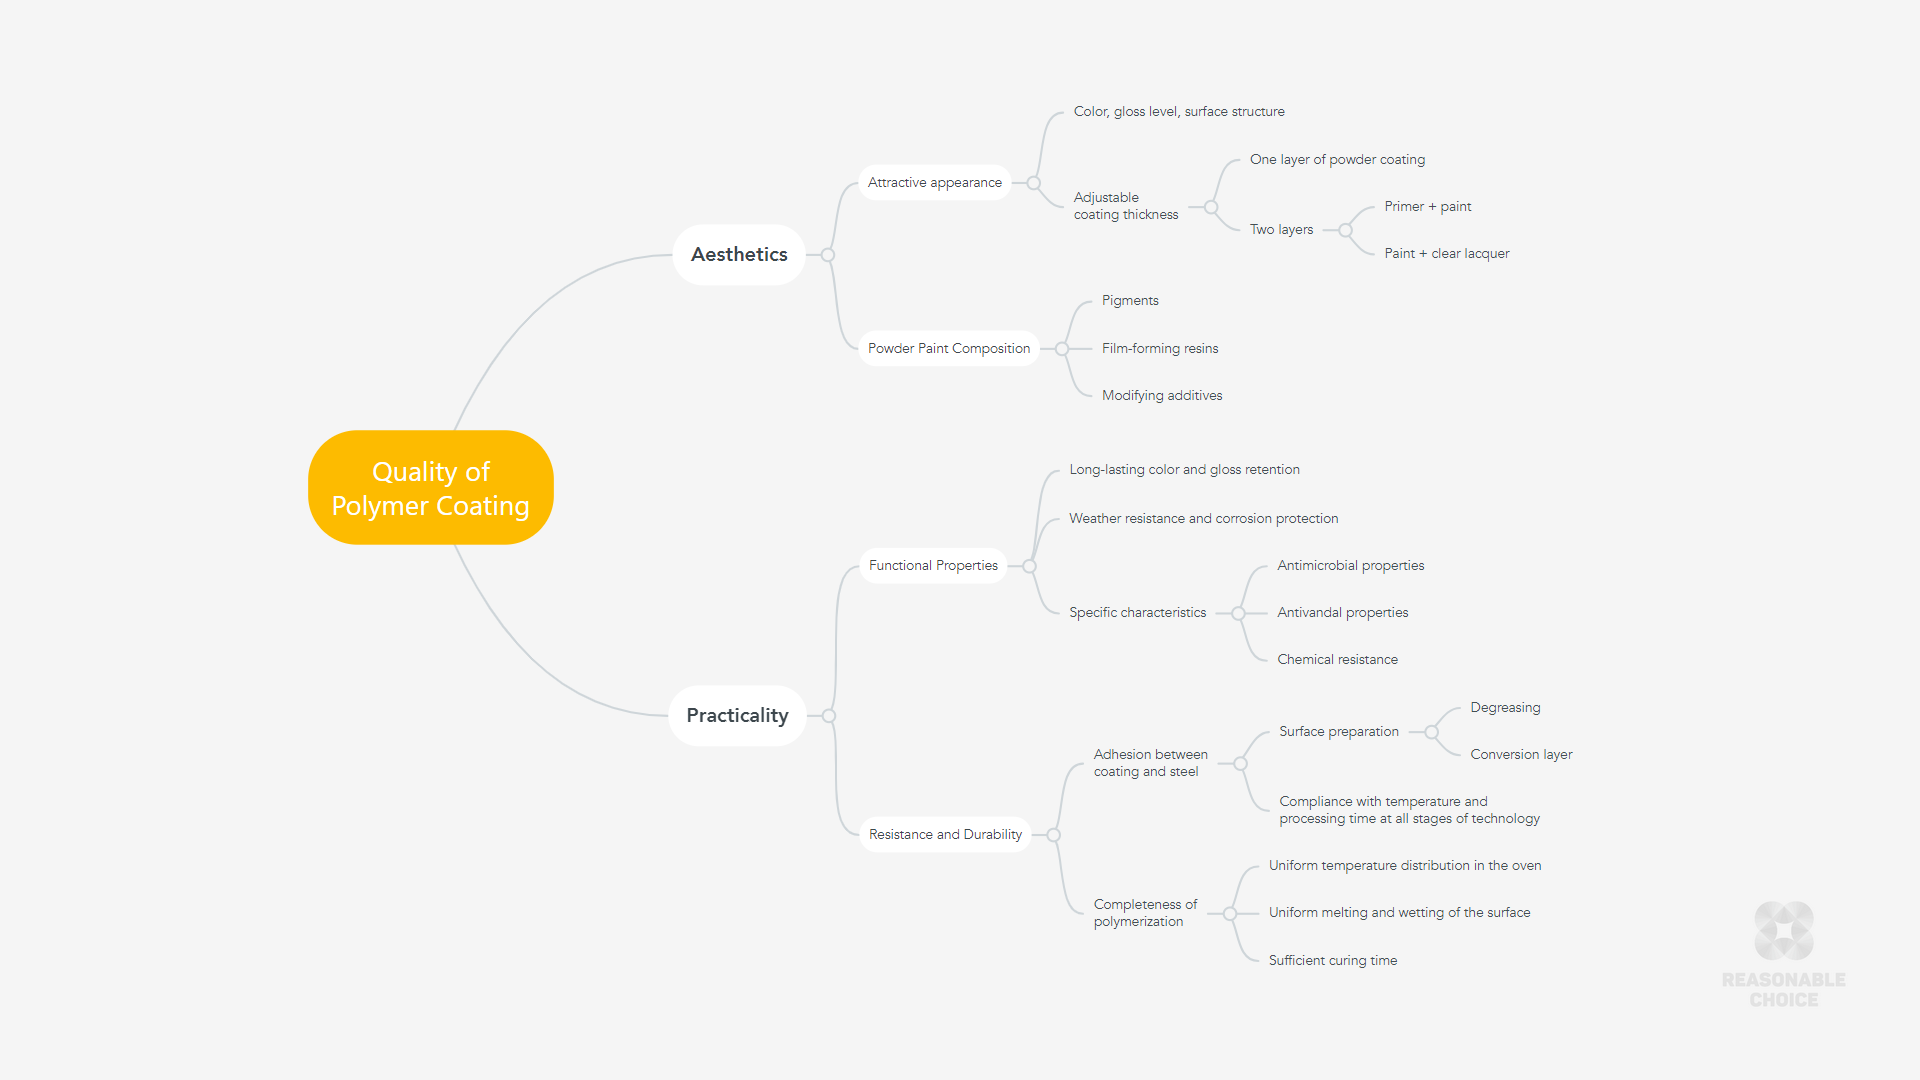 The picture shows a mind map of the Quality of Polymer Coating